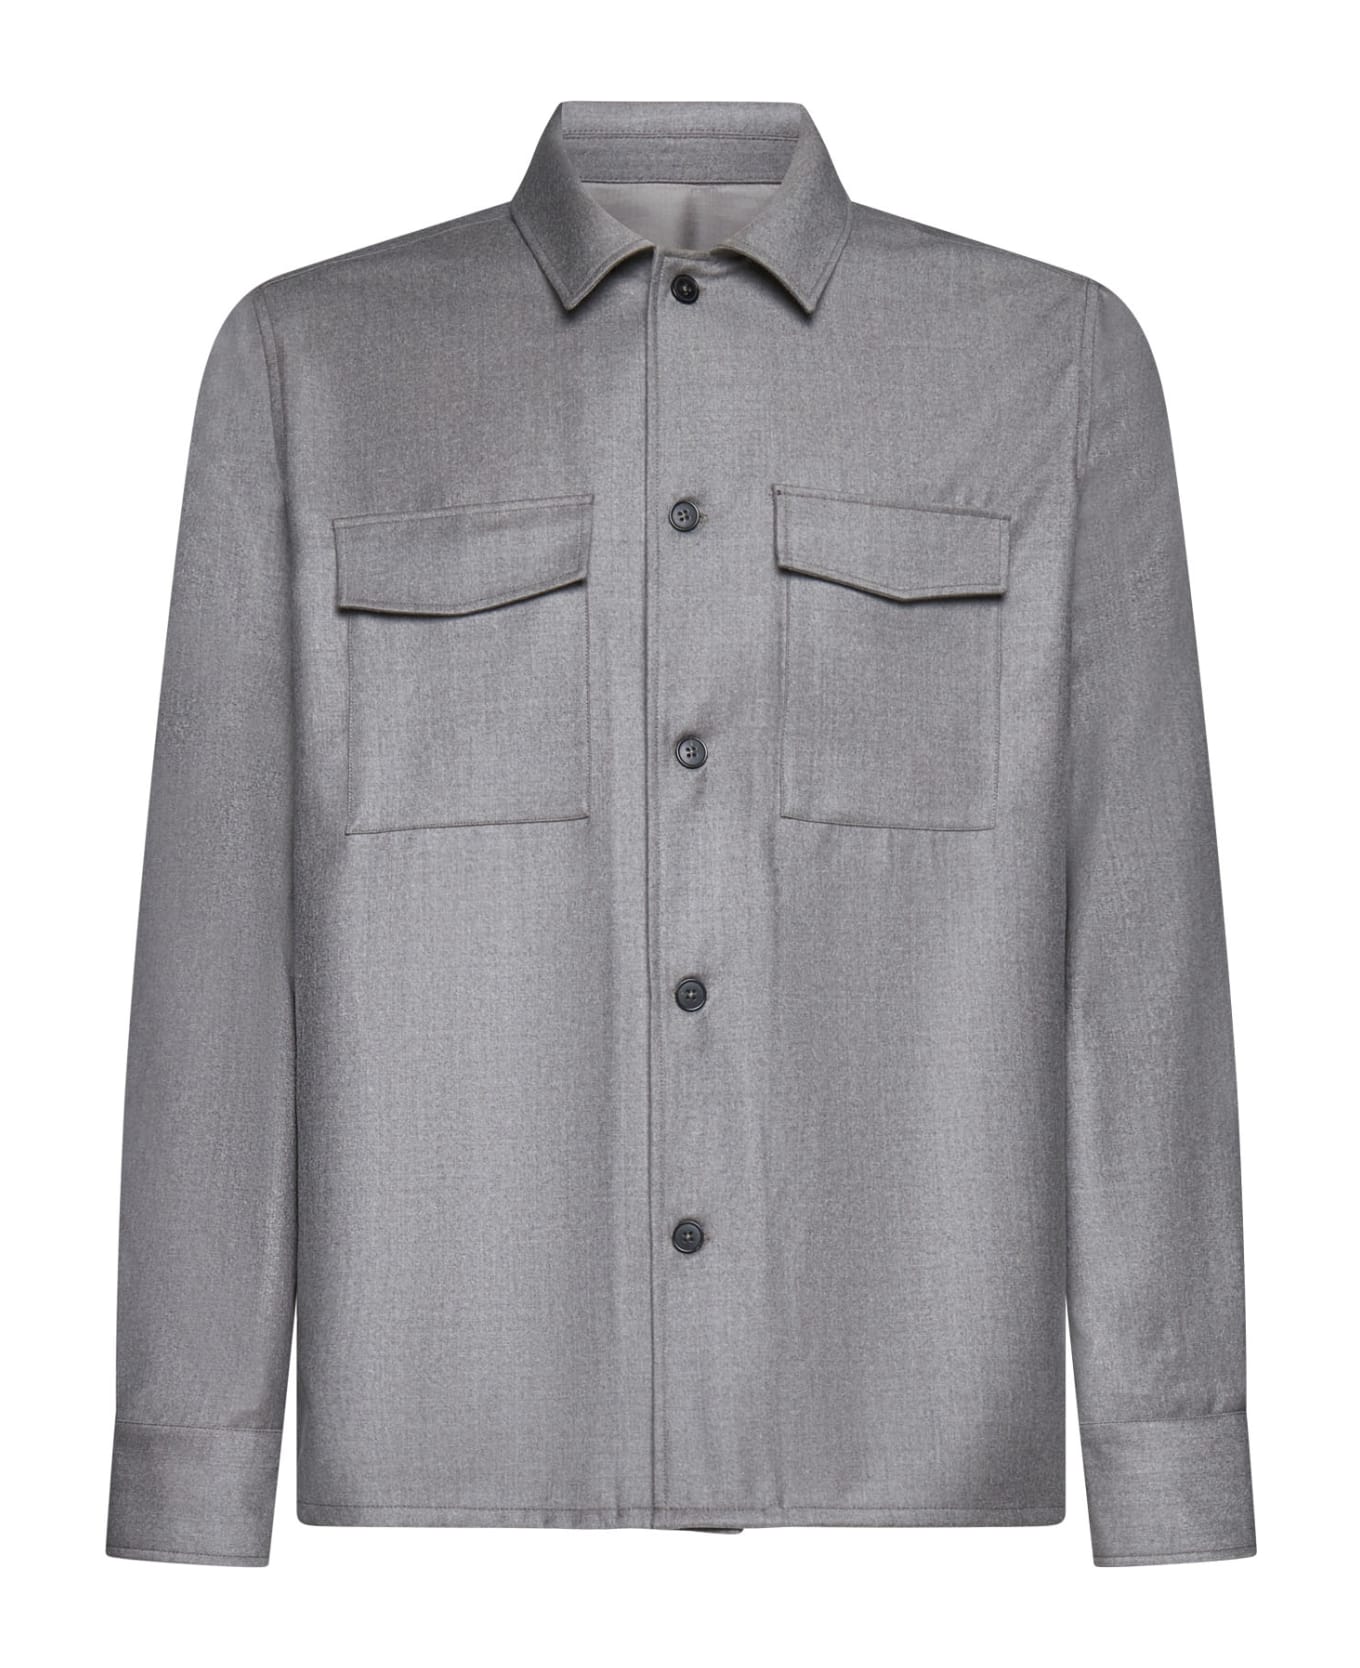 Low Brand Shirt - Taupe